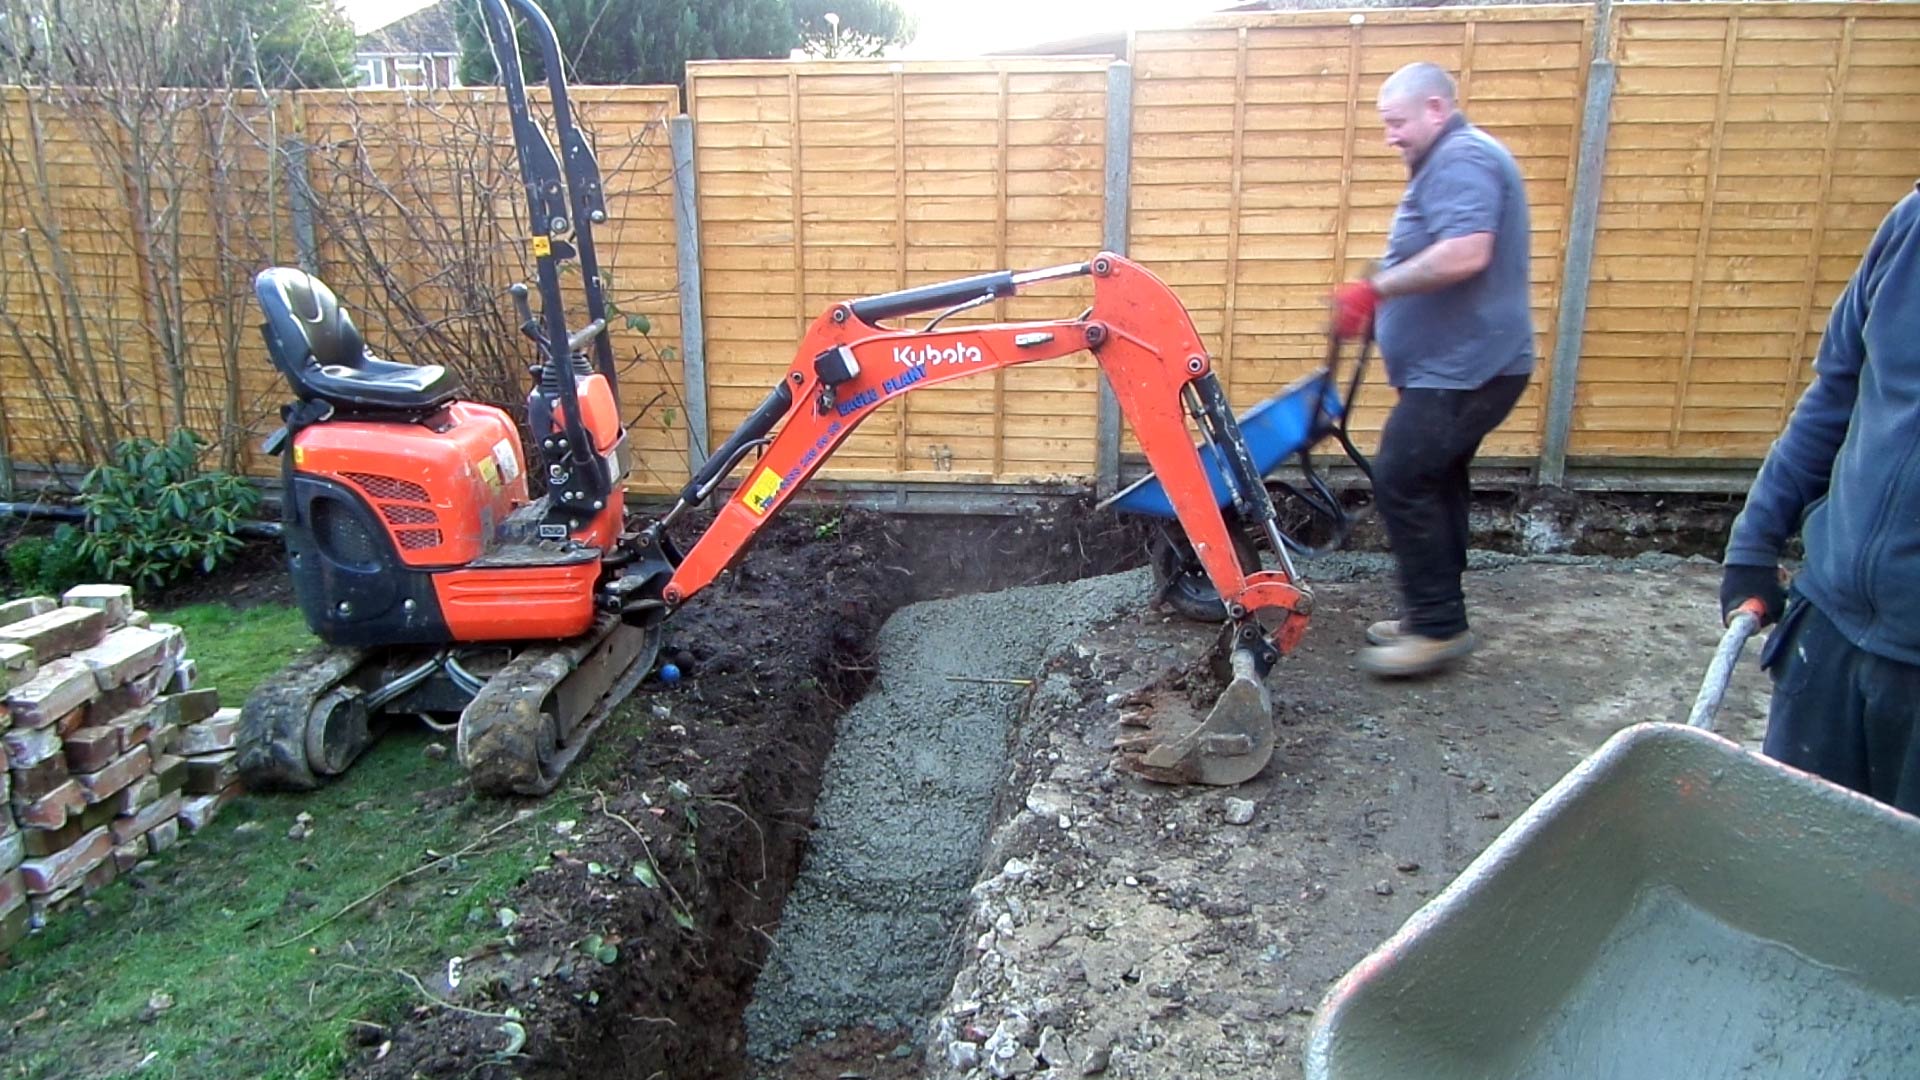 365 Concrete supply quality concrete for foundations and footings